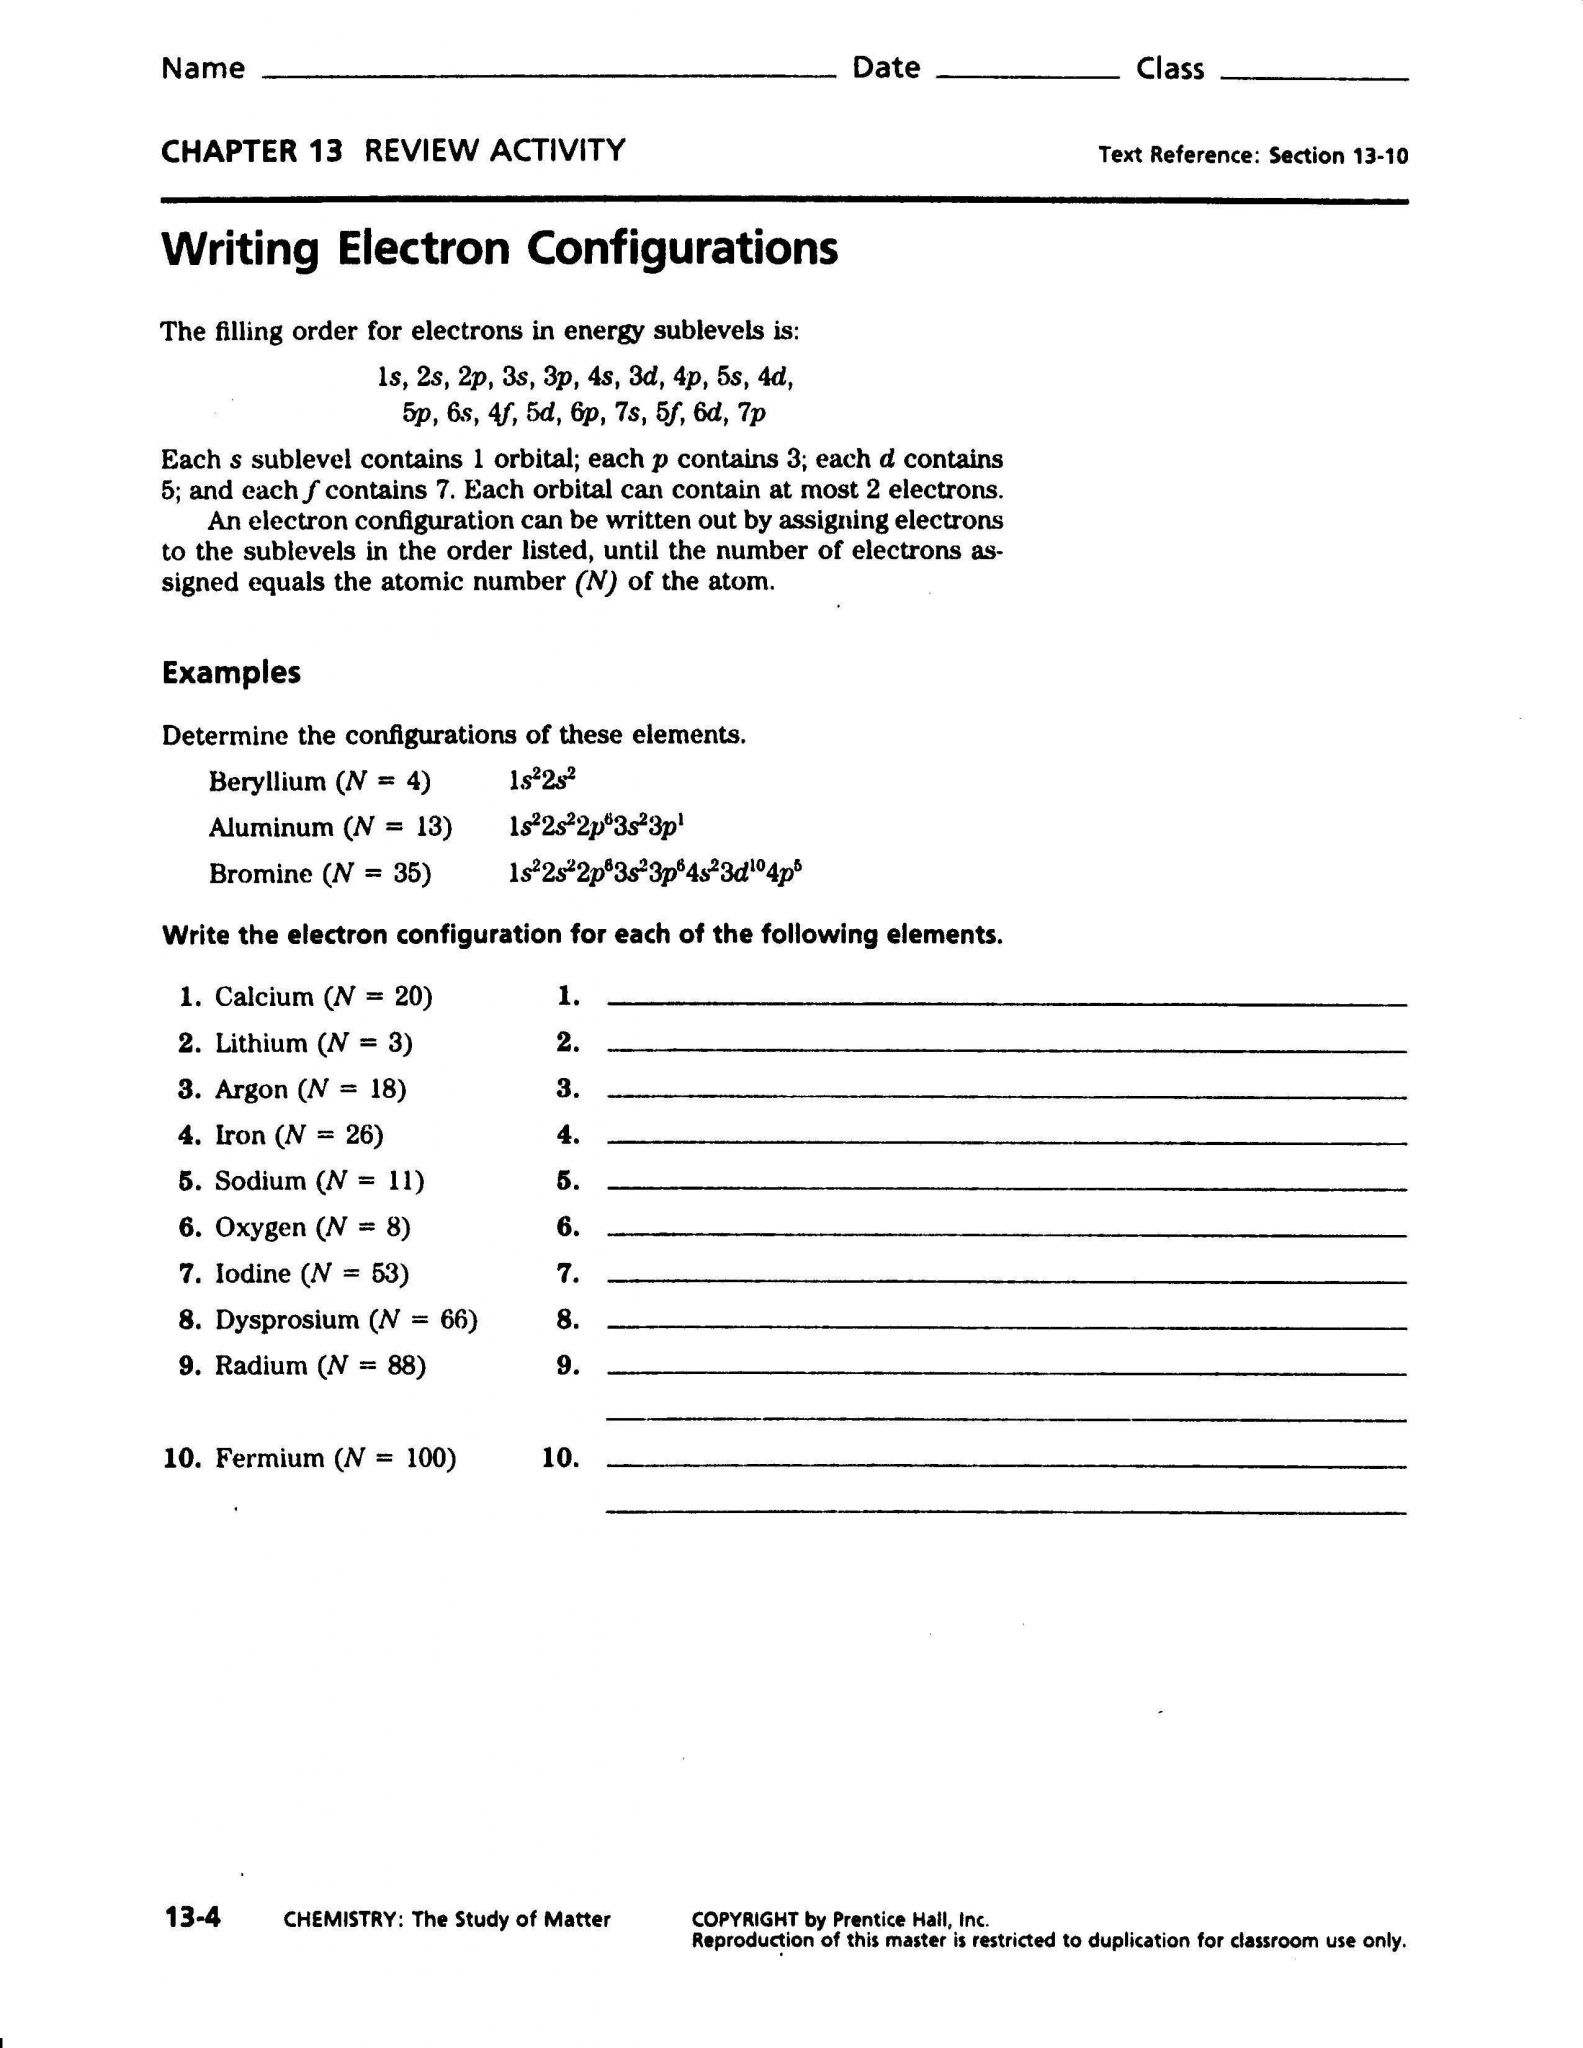 Progressive Era Review Worksheet Answers Also Specific Heat Calculations Worksheet Choice Image Worksheet Math